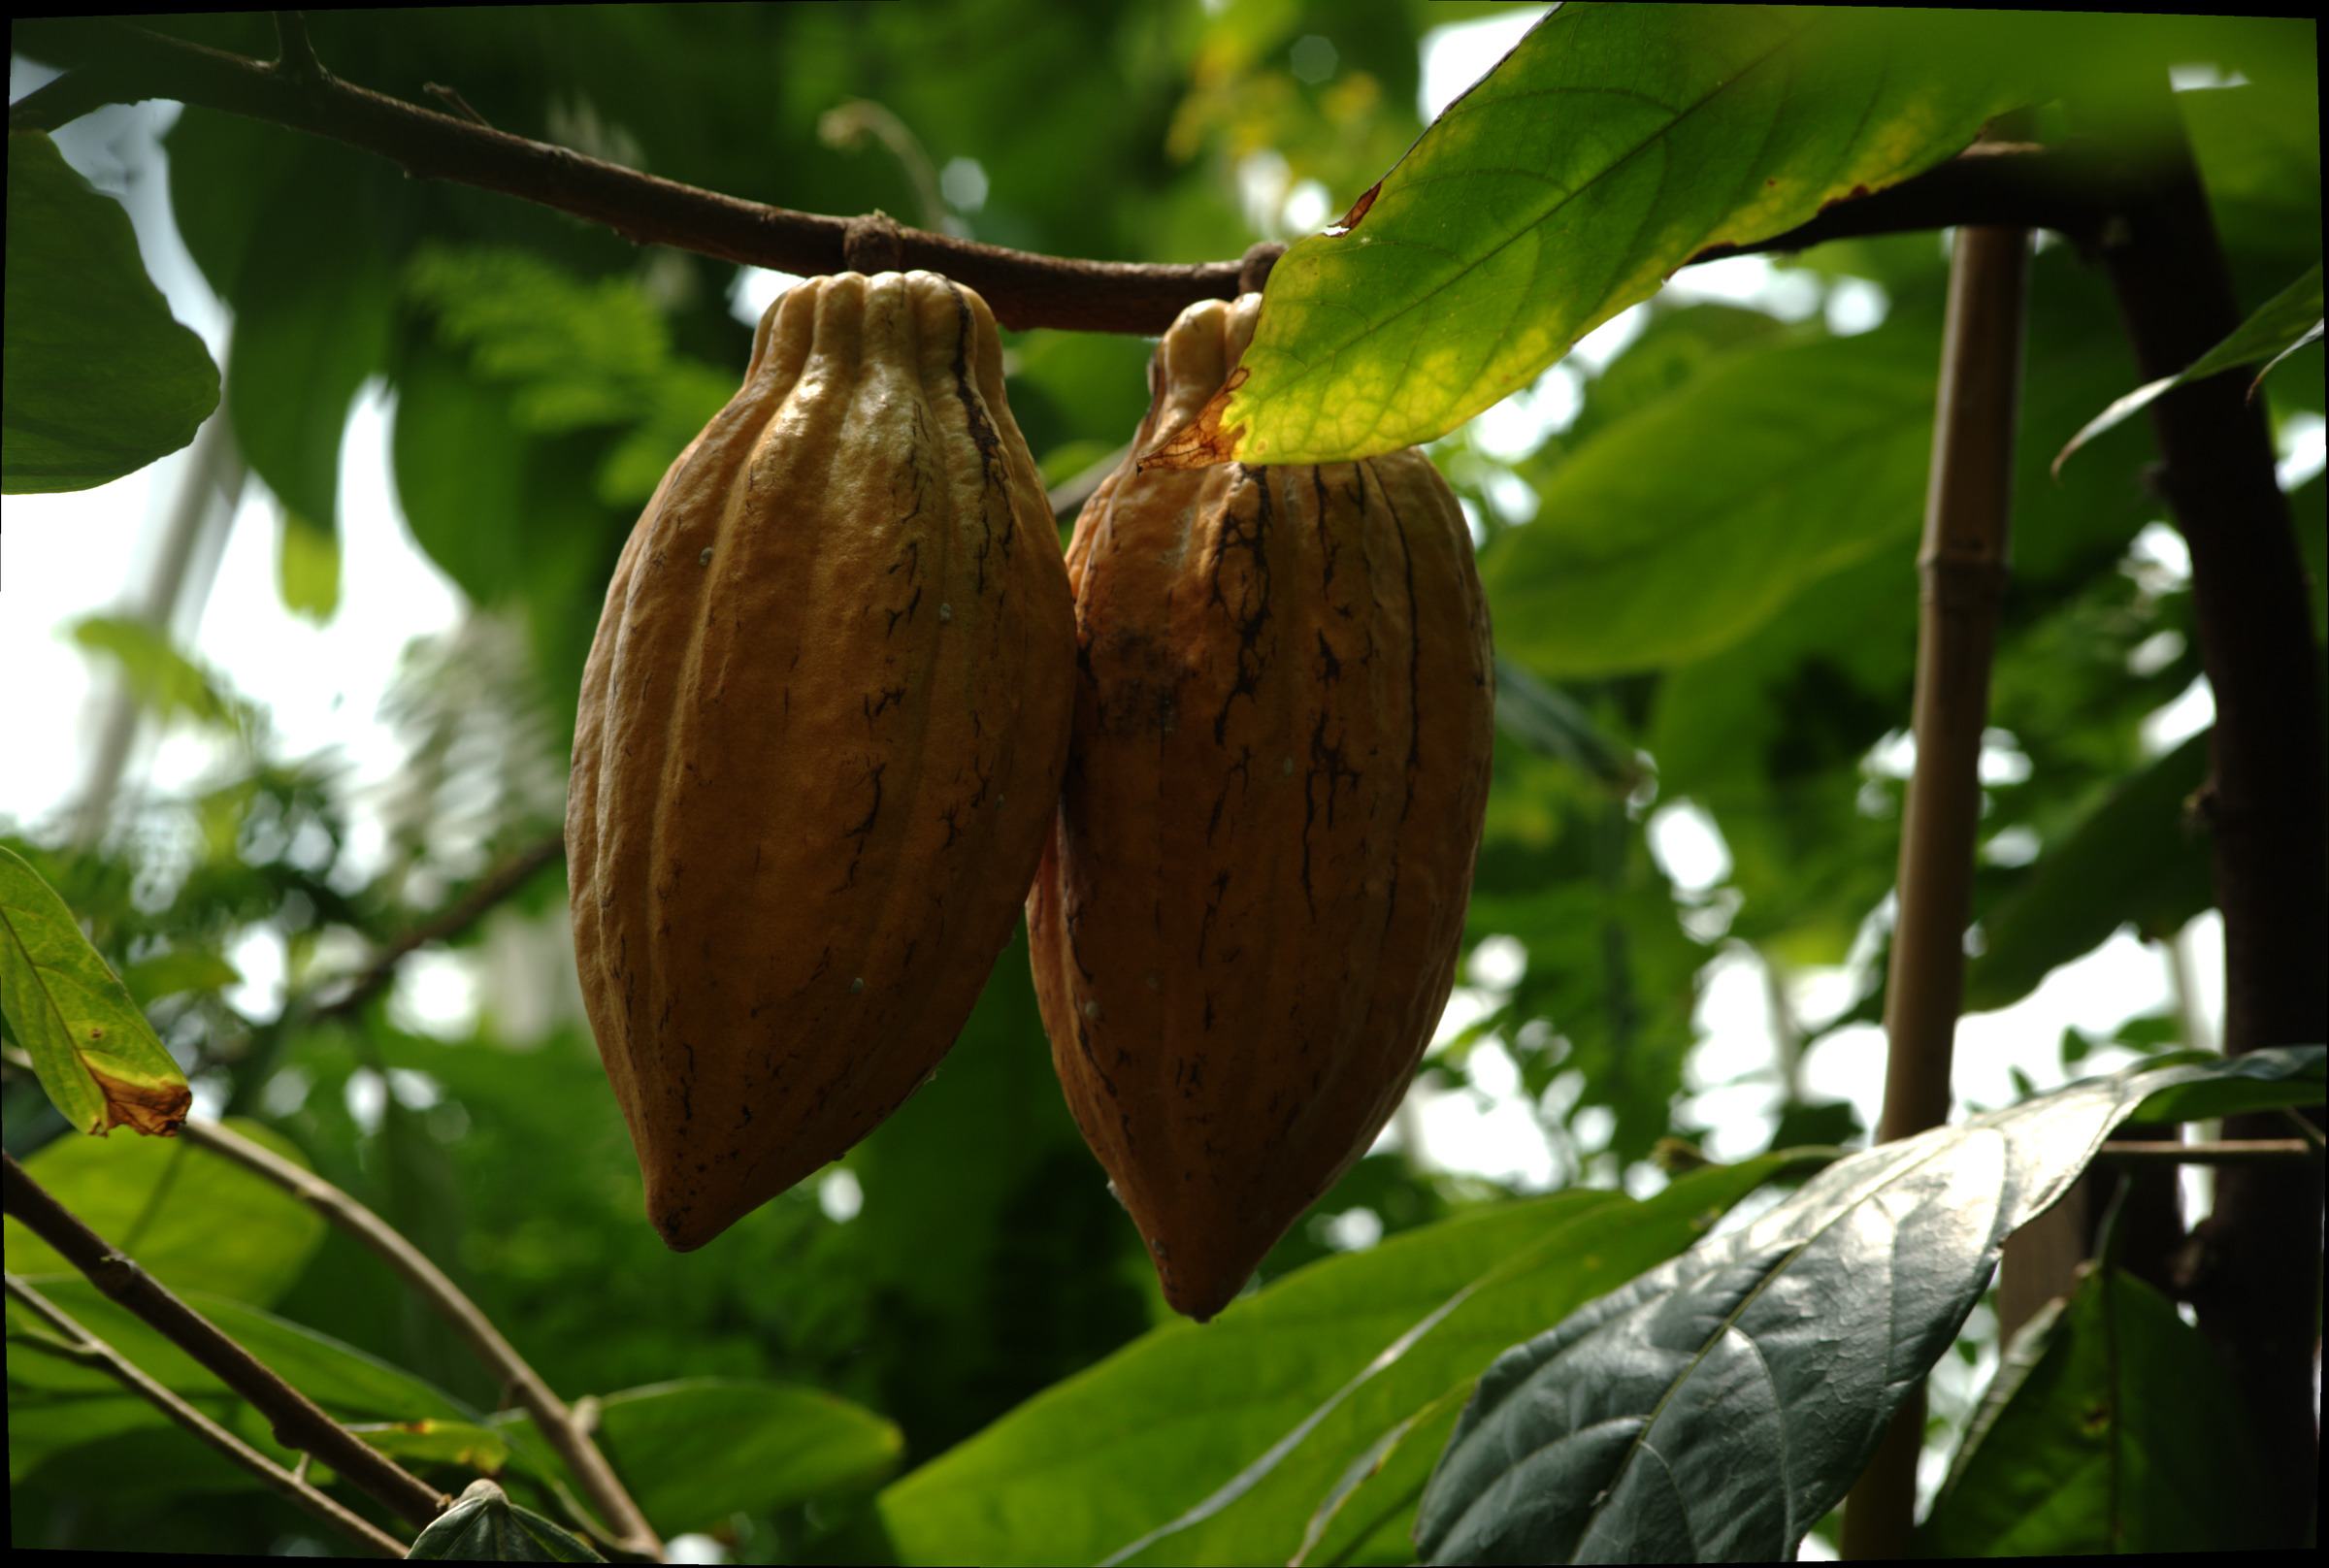 Oval shaped cacao beans hang from a stem. Their textured surface contains a series of divets that run from the top to the bottom of the pod.